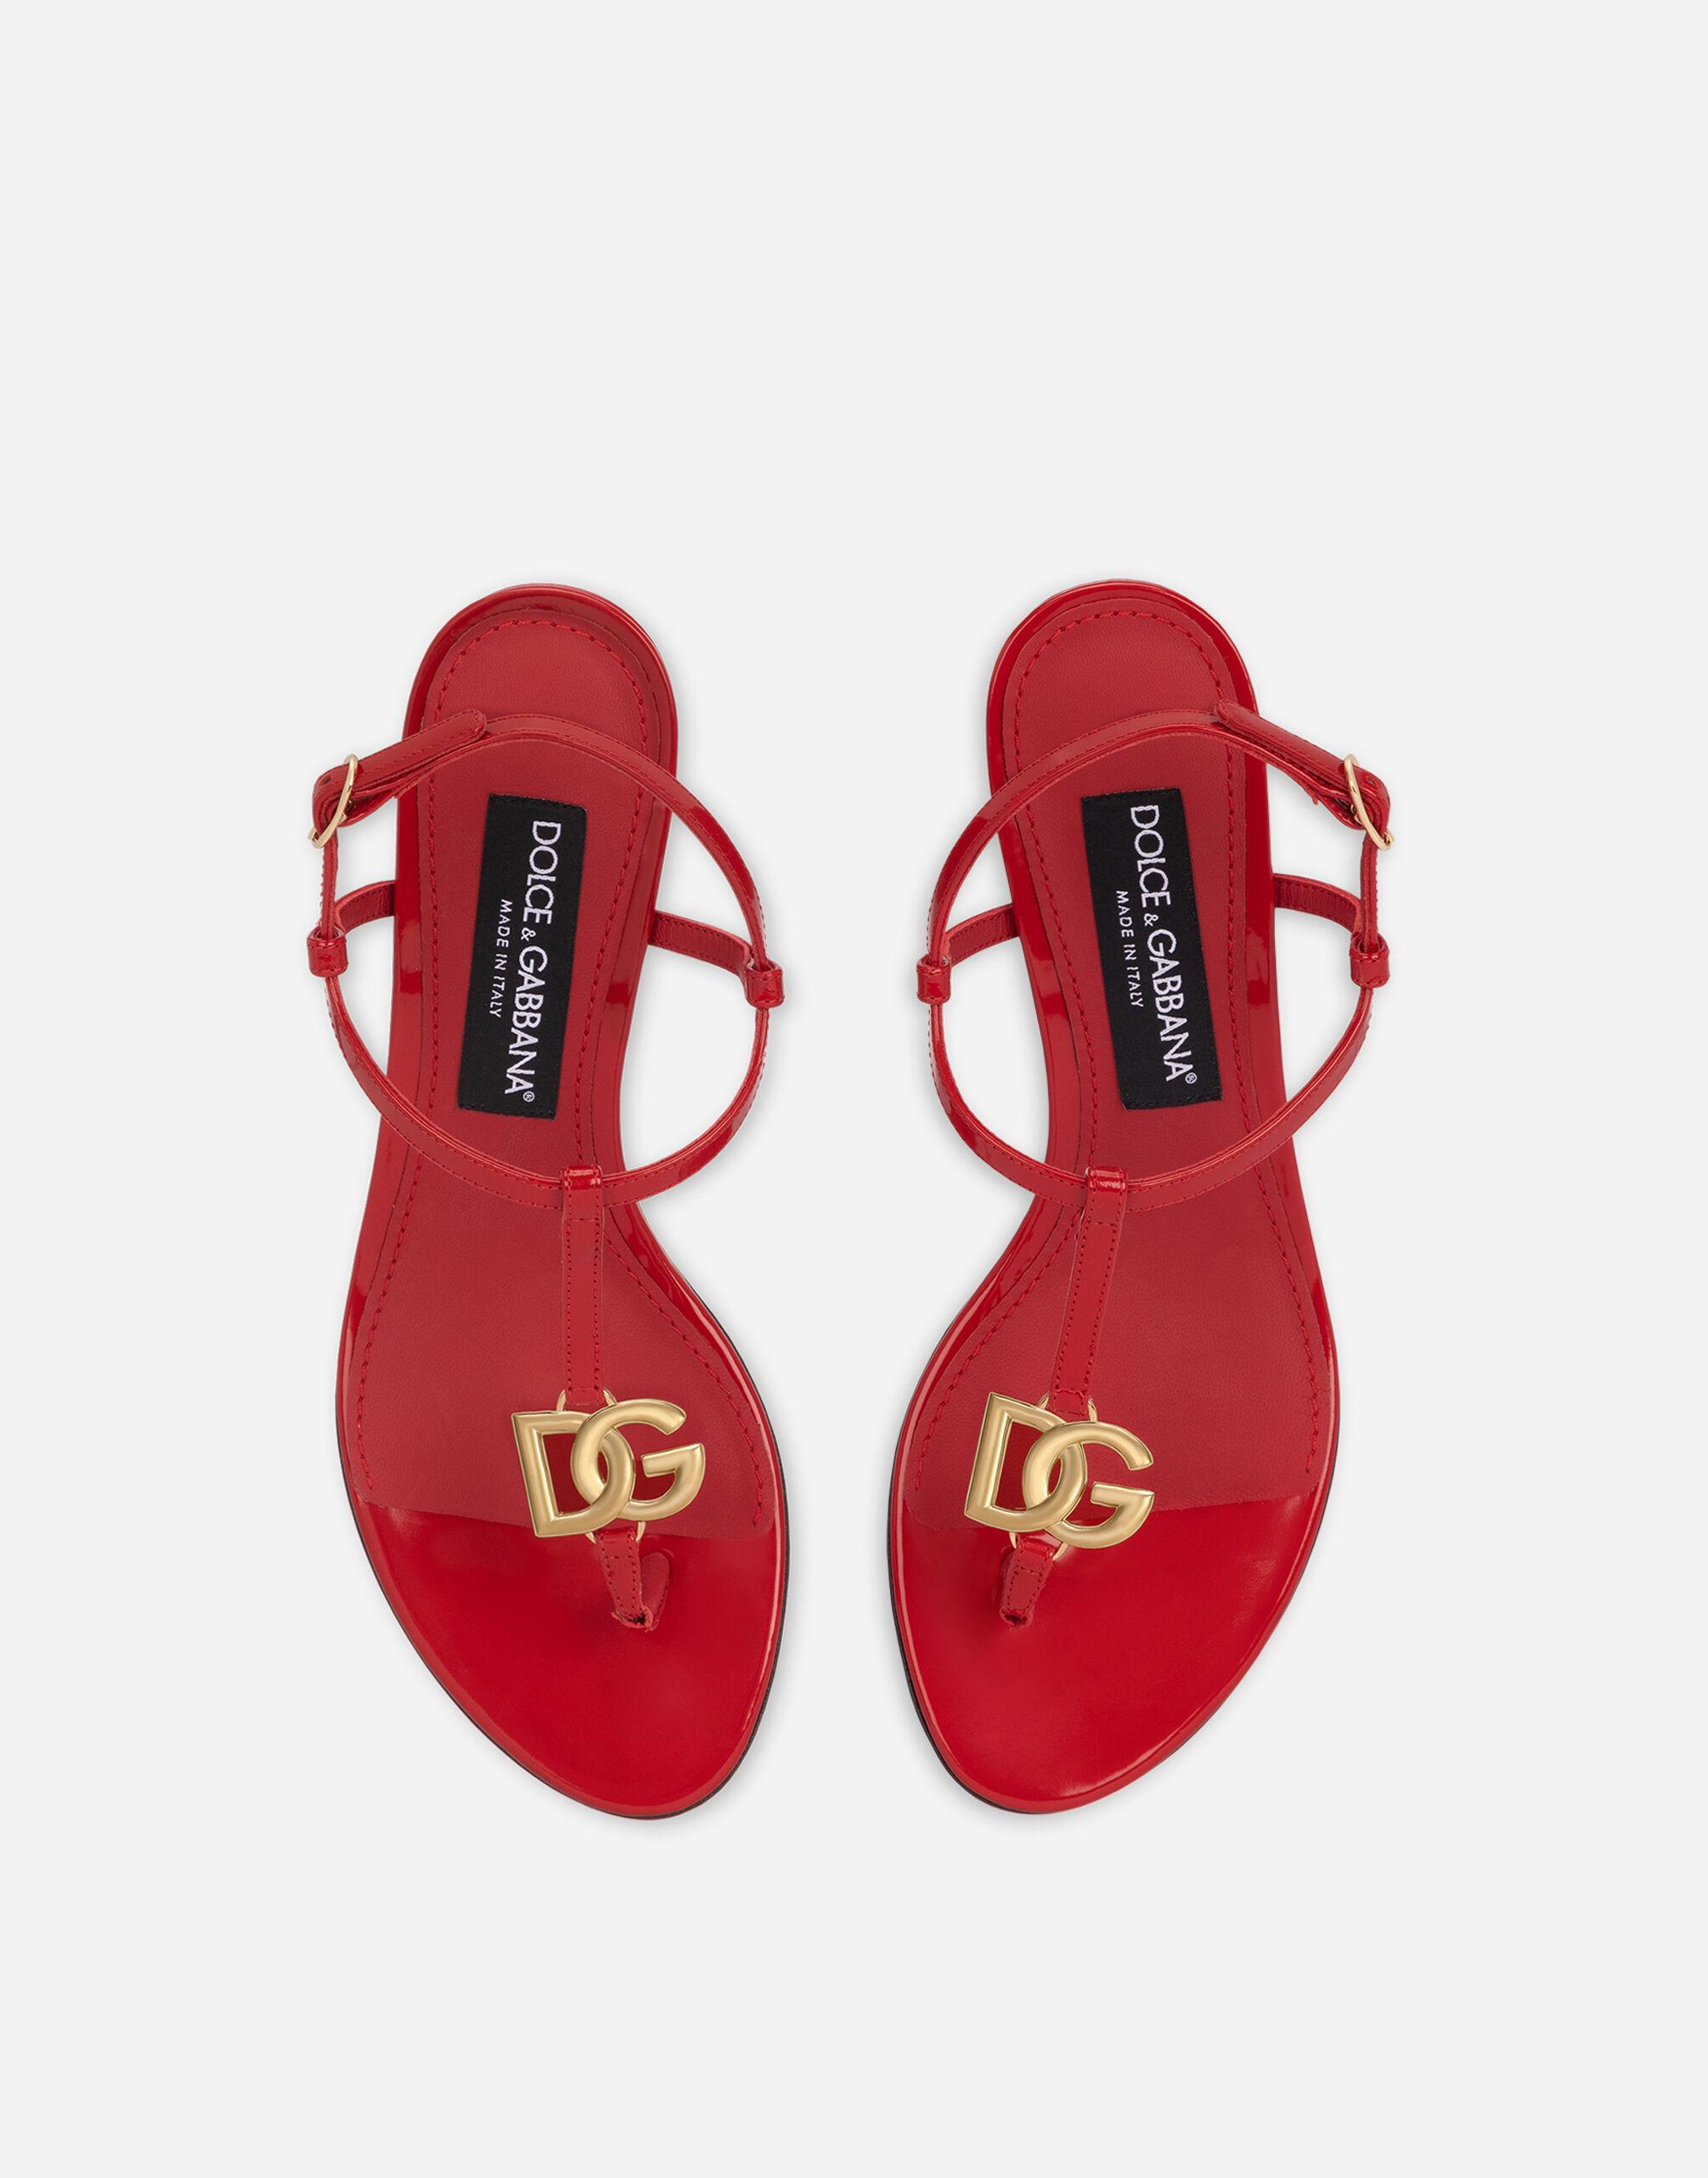 Dolce & Gabbana Patent Leather Thong Sandals With Dg Logo in Red | Lyst